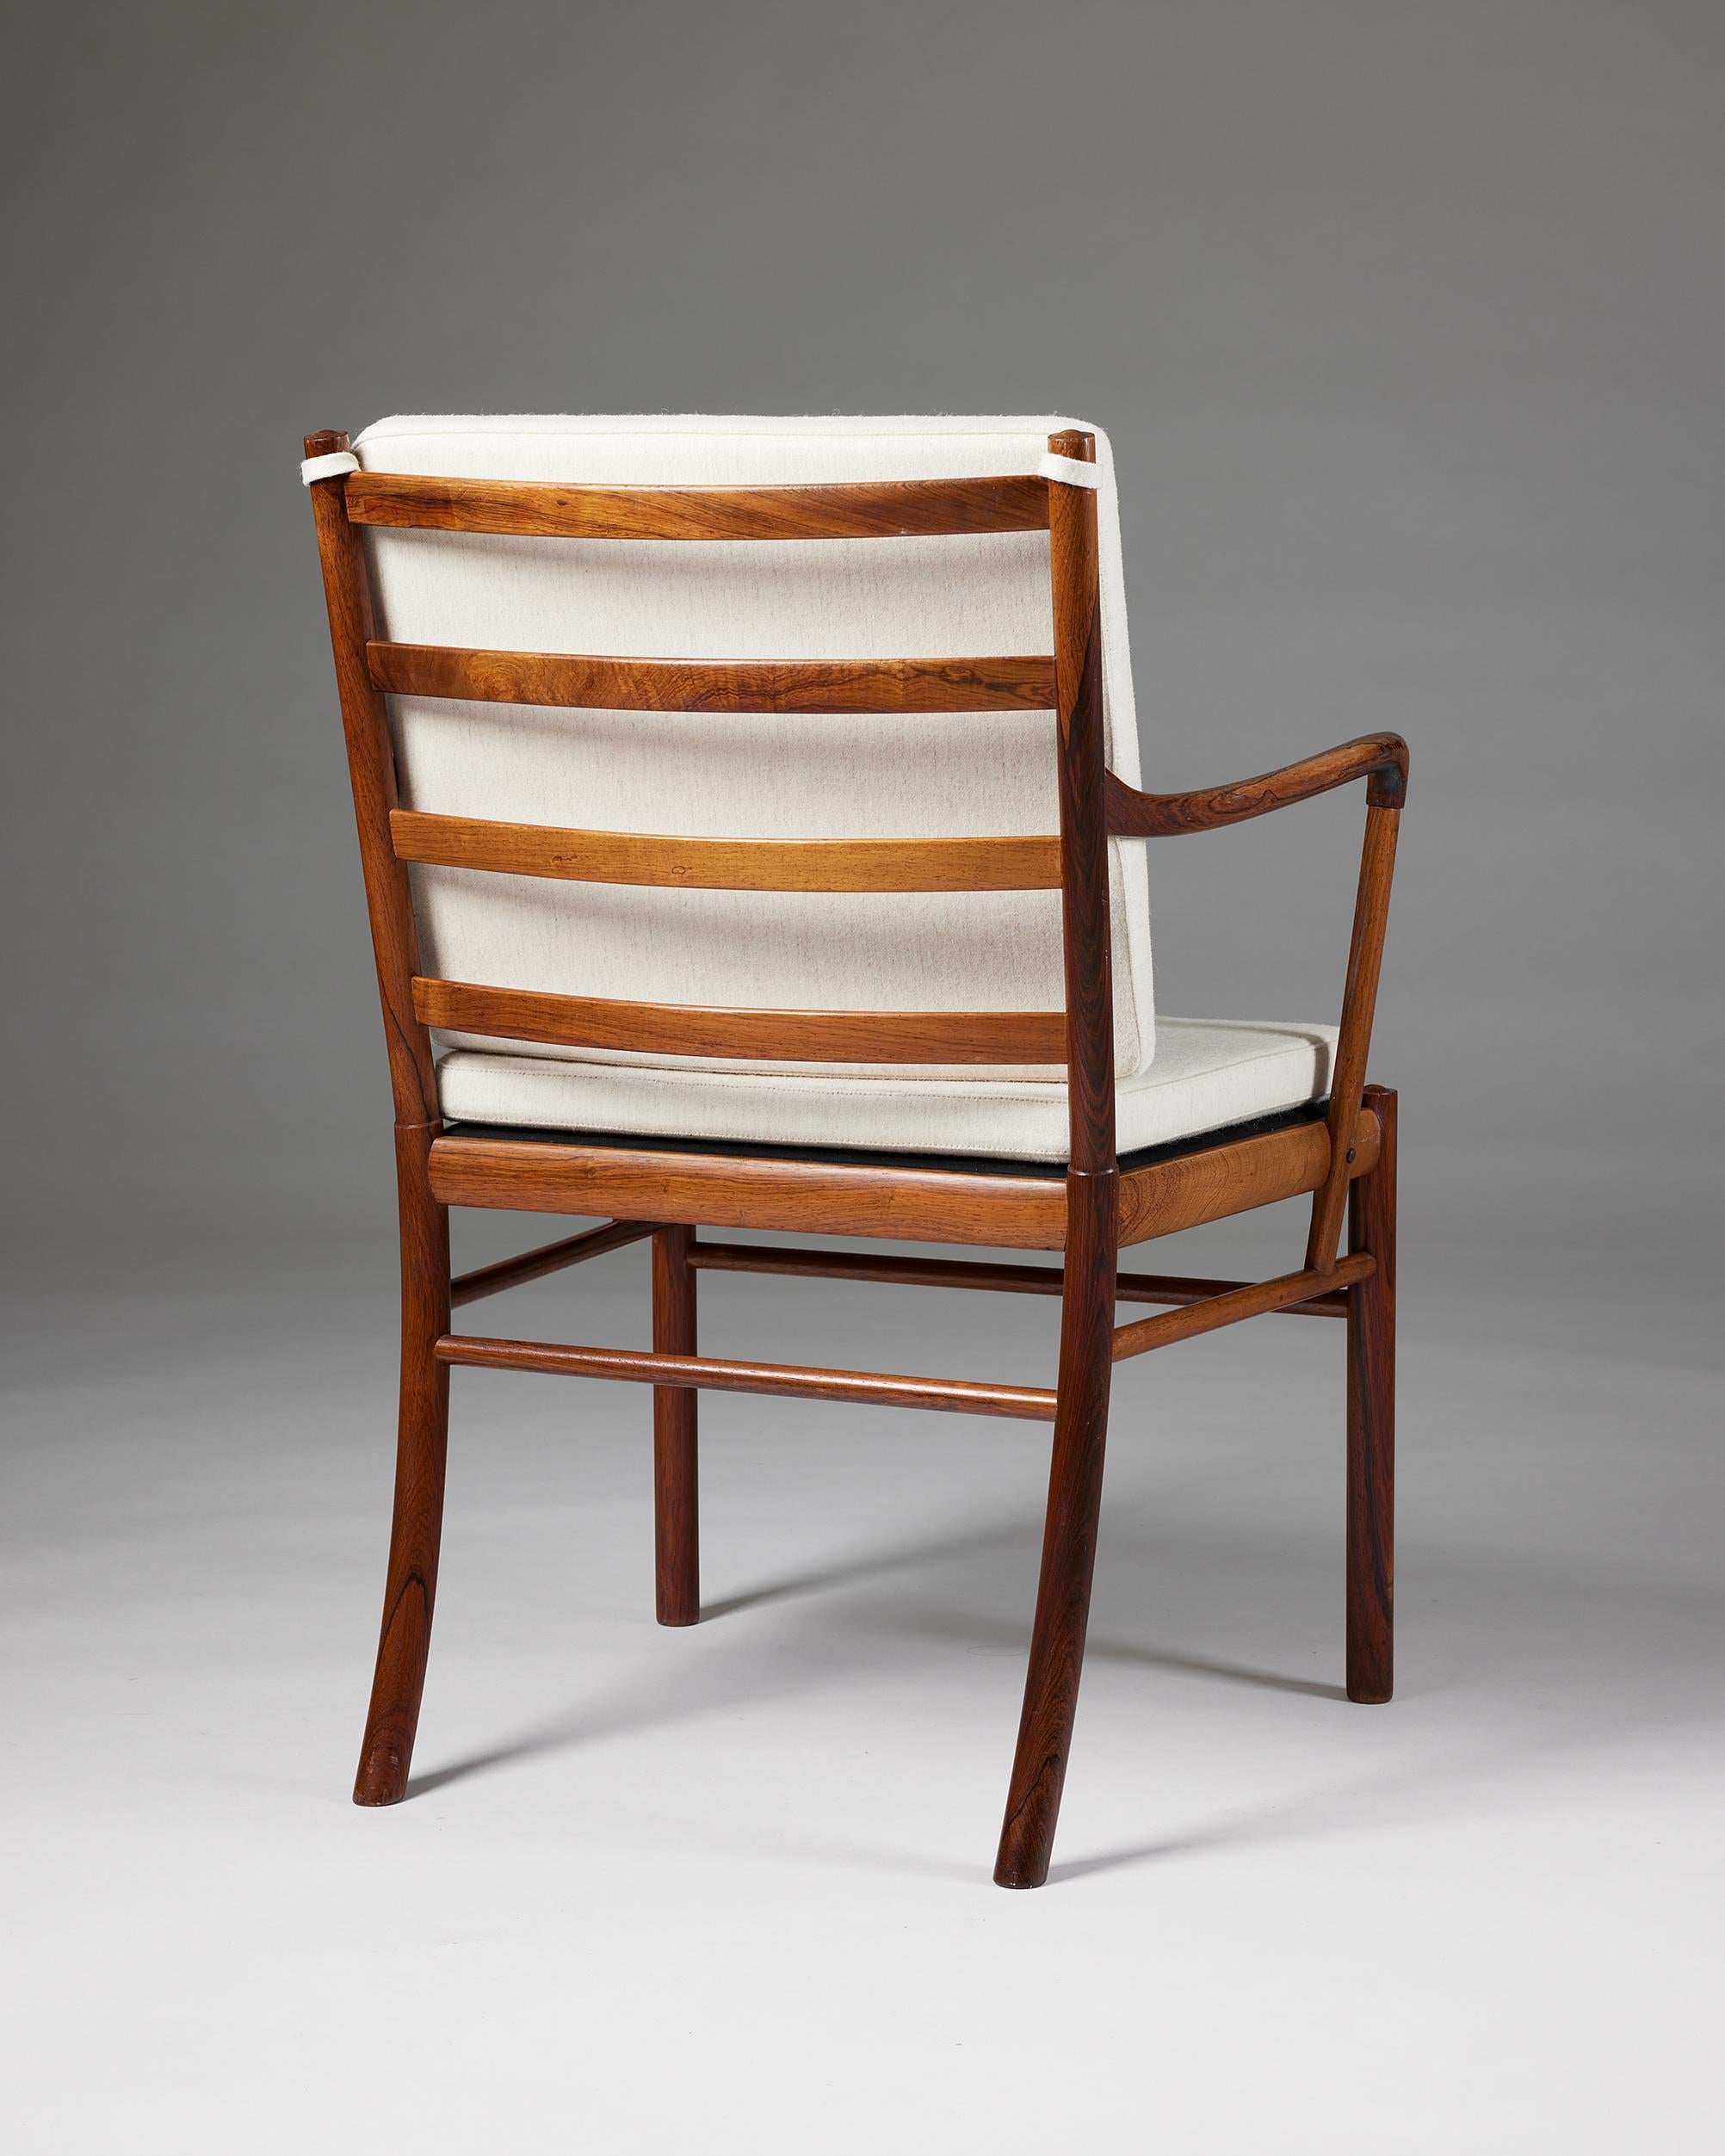 20th Century Armchair ‘Colonial’ Designed by Ole Wanscher for Poul Jeppesen